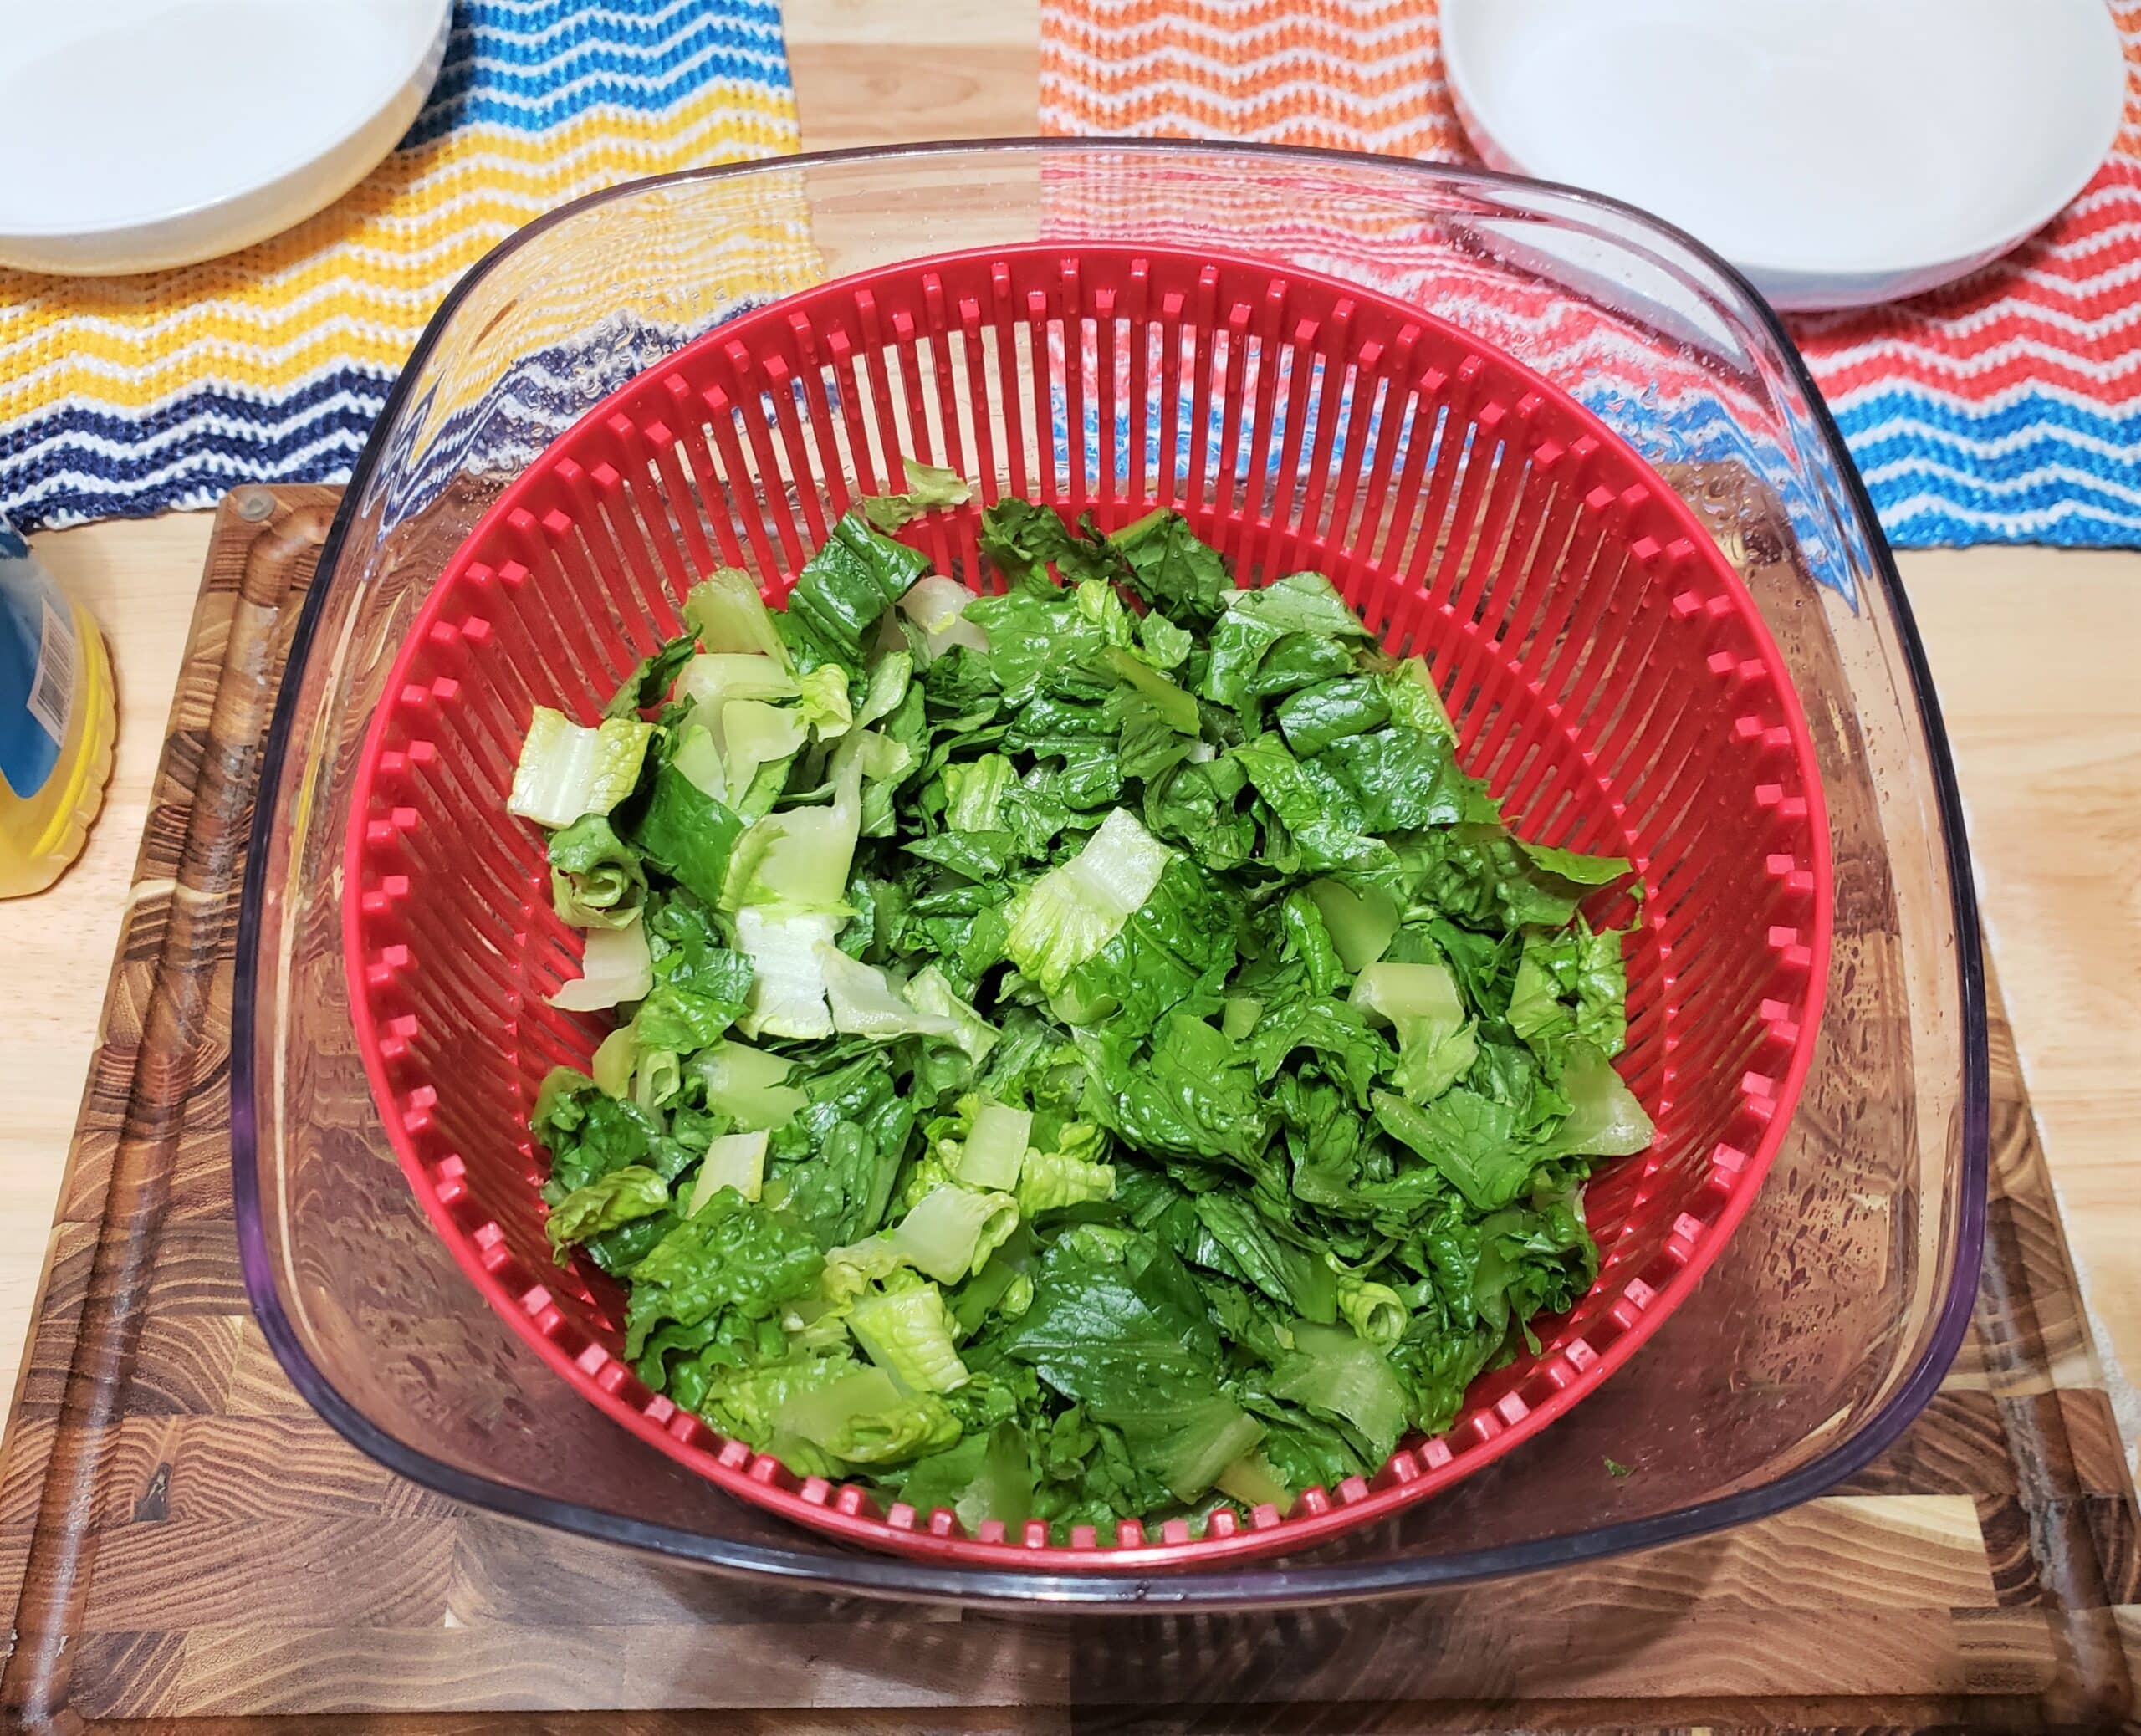 Chopped lettuce in red salad spinner